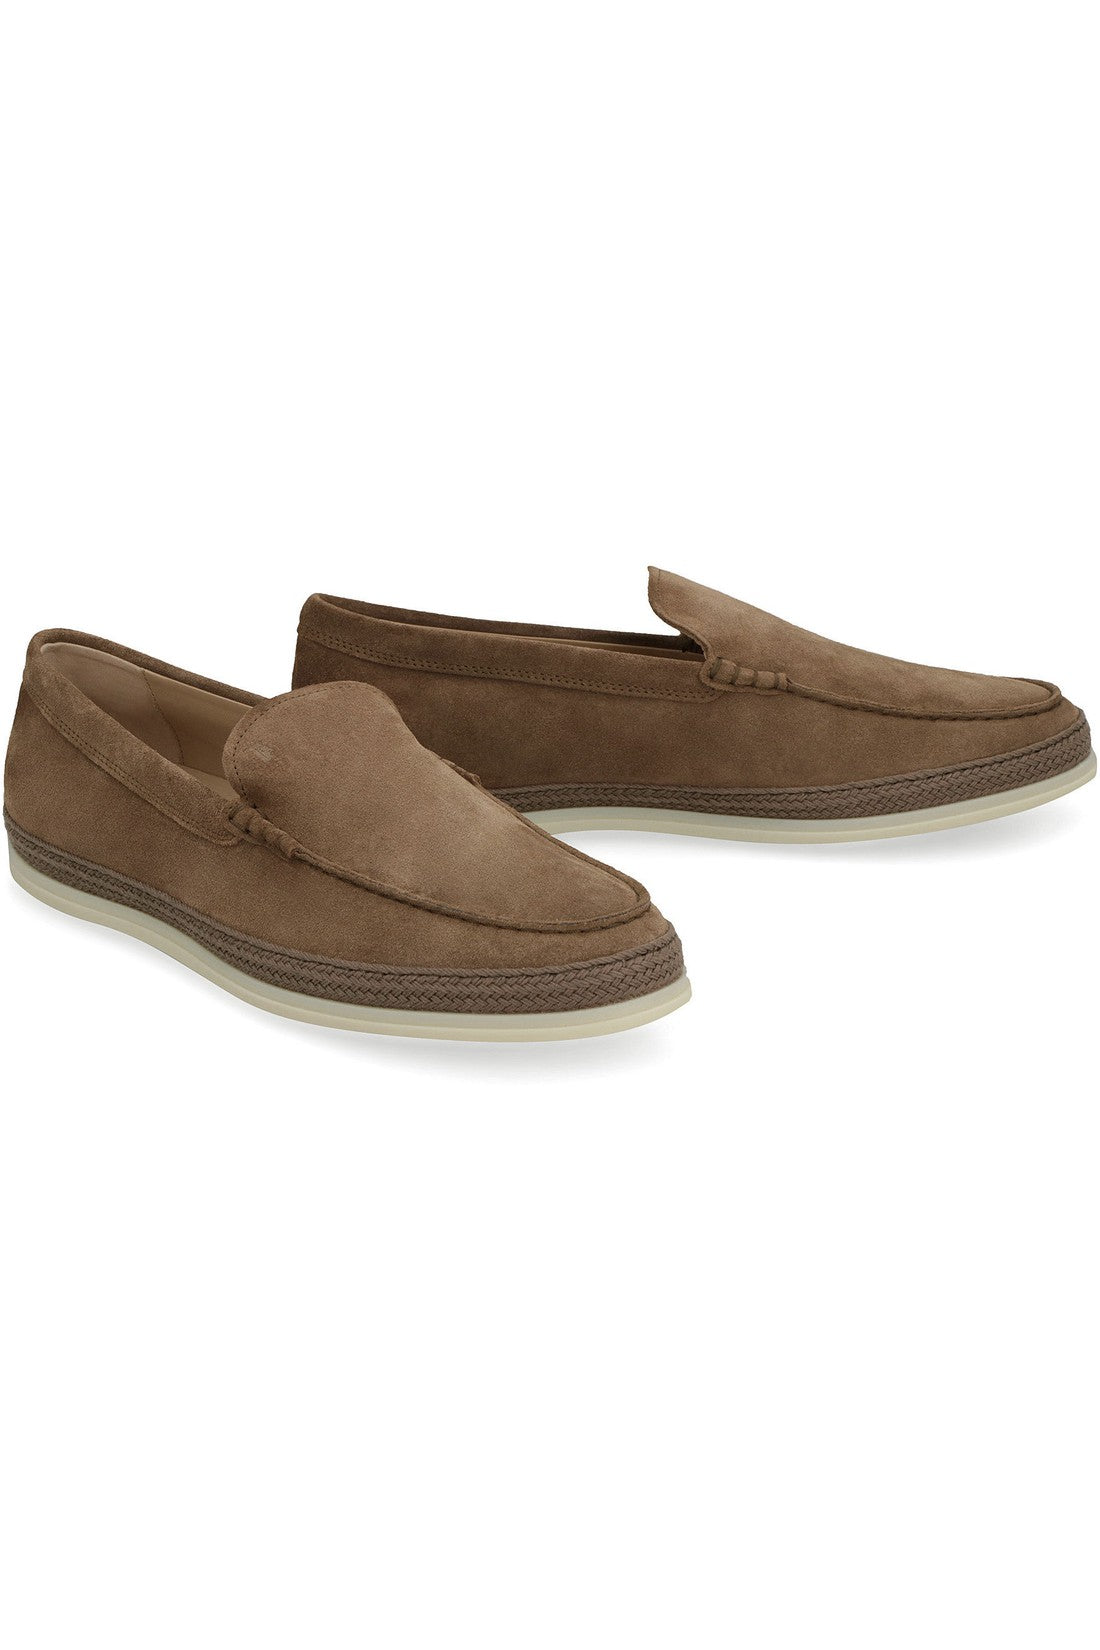 Tod's-OUTLET-SALE-Suede slip-on-ARCHIVIST